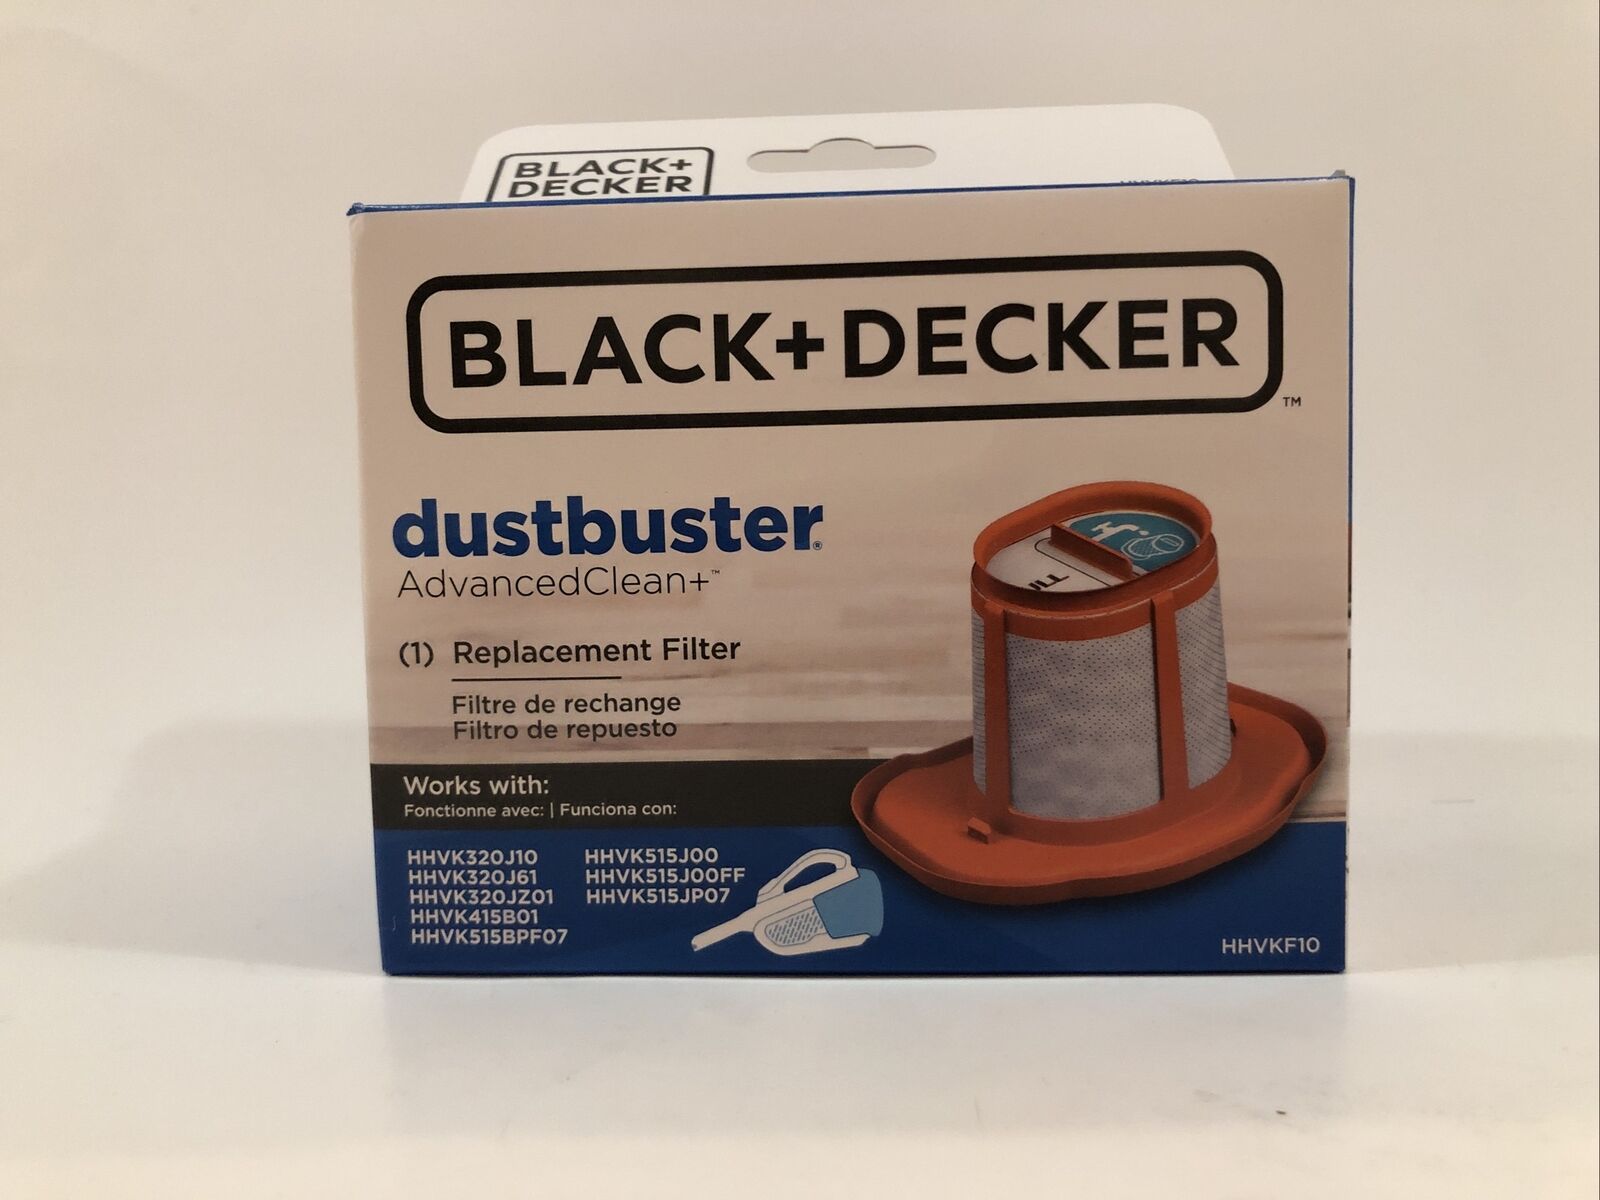 HHVKF10 Dust-buster Filter Replacement Compatible with Black and